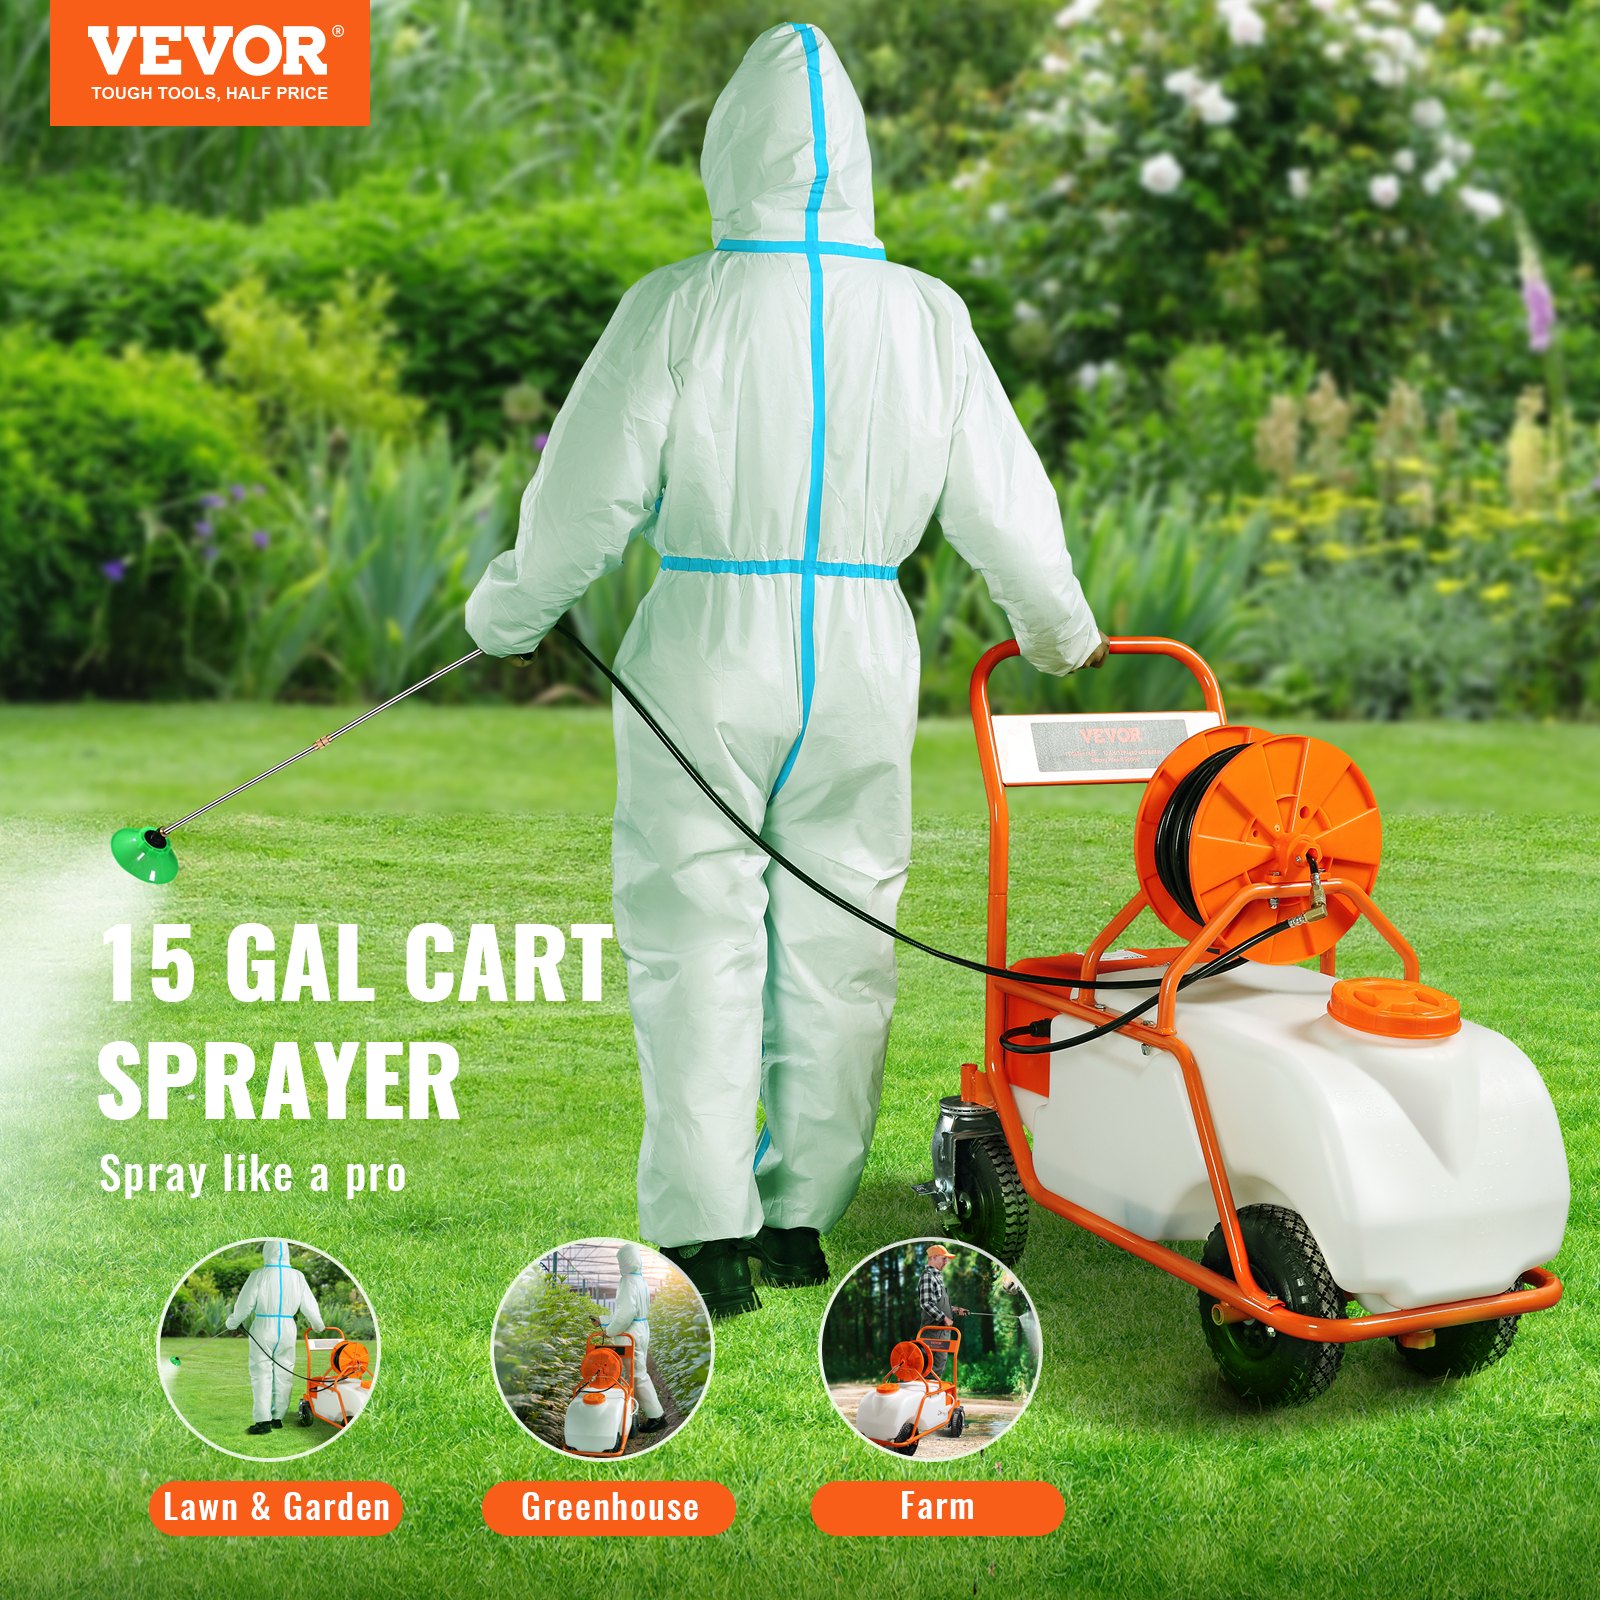 Nozzles and Wands of VEVOR Battery Powered Lawn Sprayer